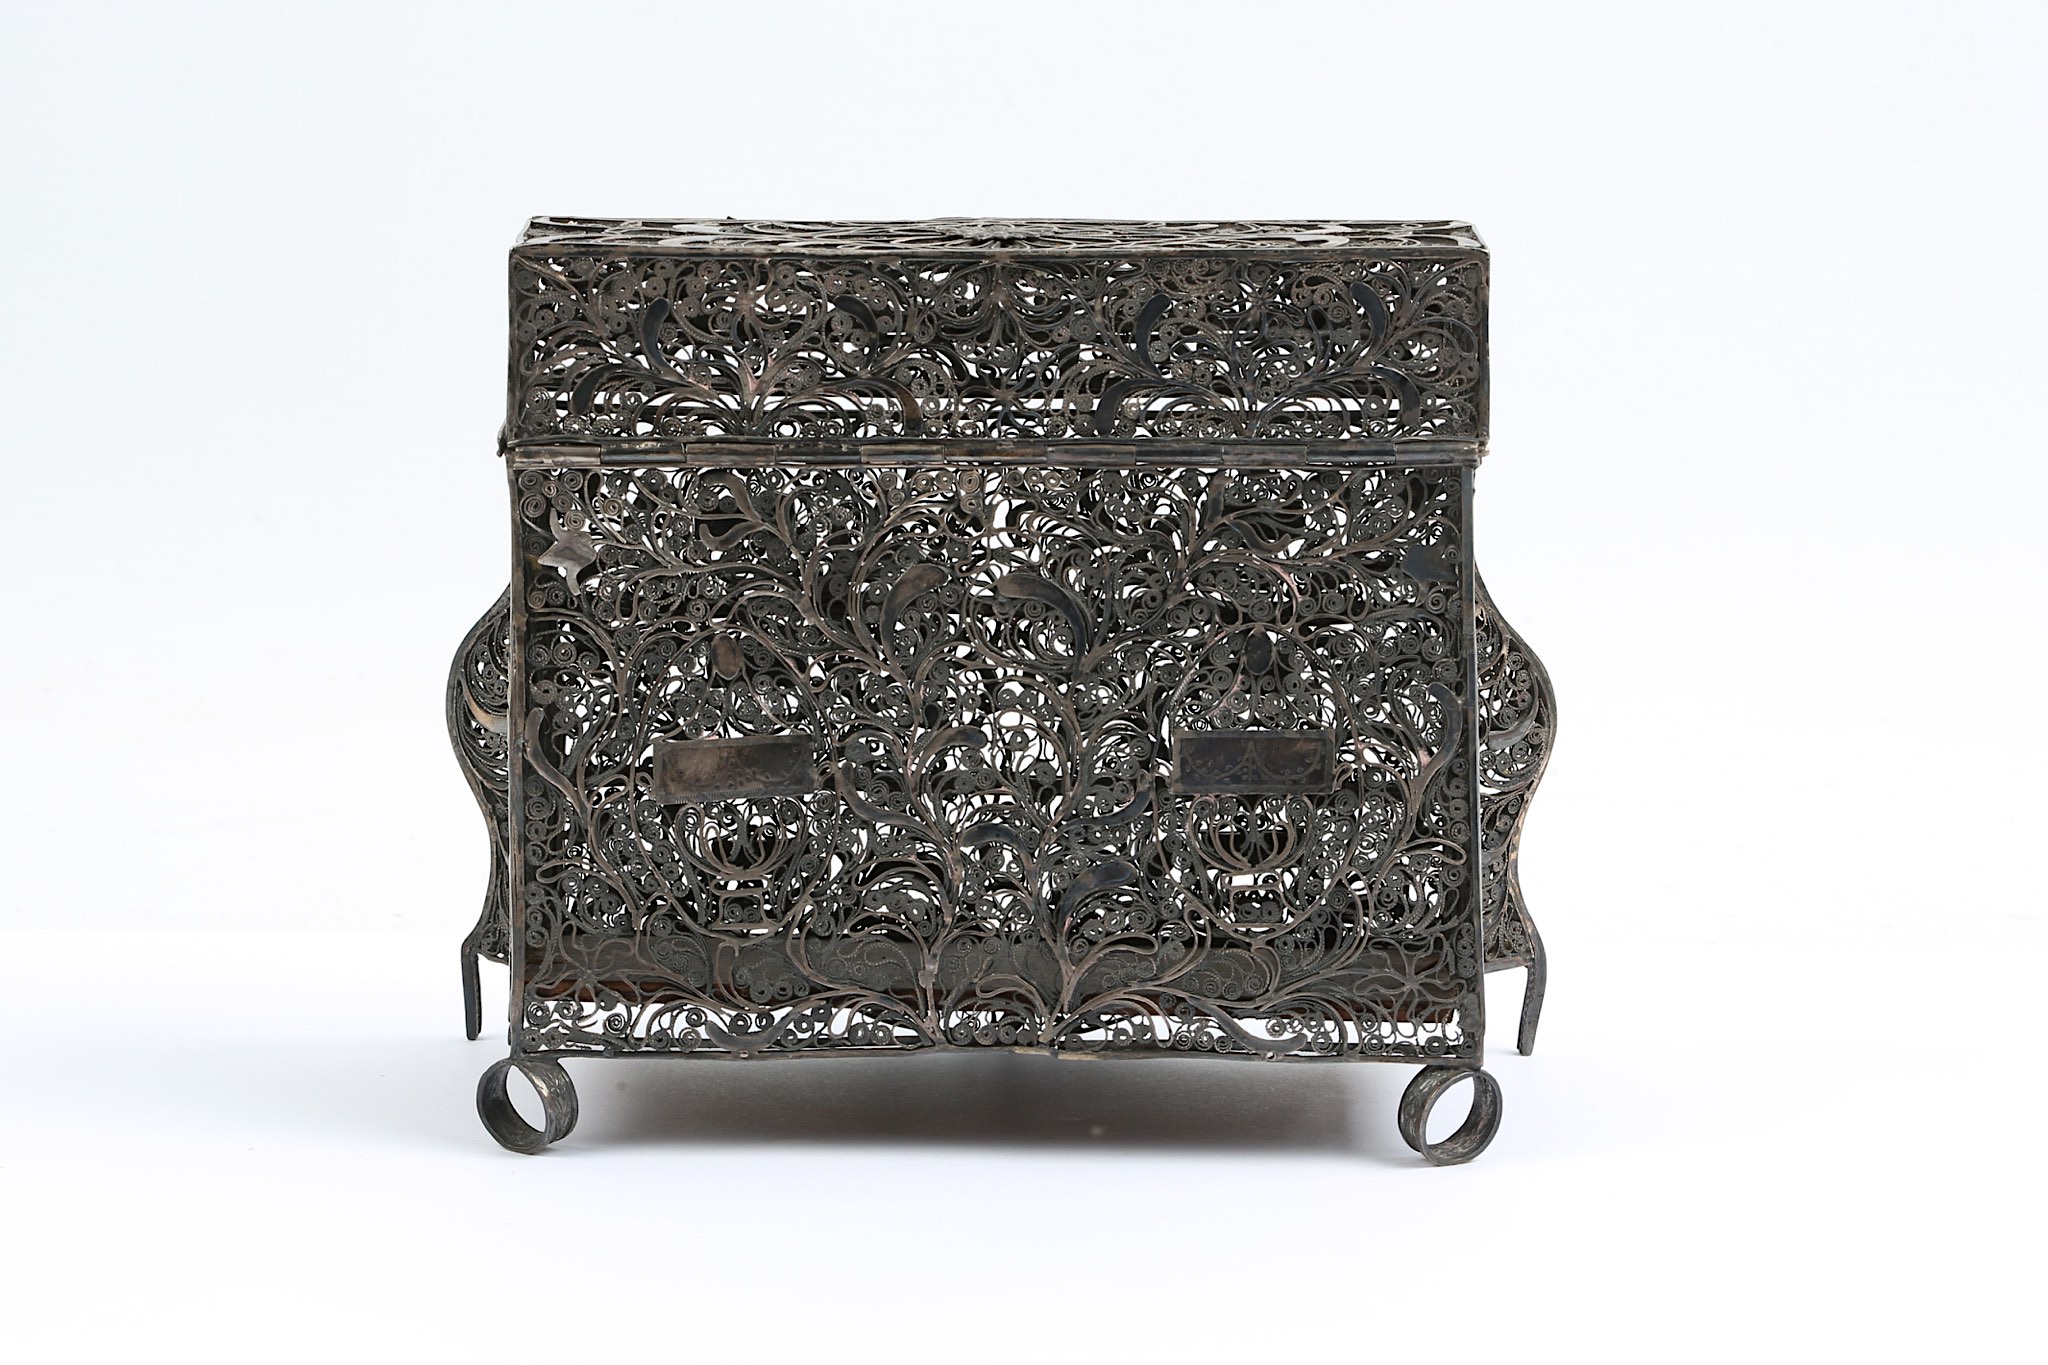 A LATE 18TH / 19TH CENTURY INDO-PORTUGUESE SILVER FILIGREE CASKET PROBABLY GOA modelled as a bombe - Image 4 of 8